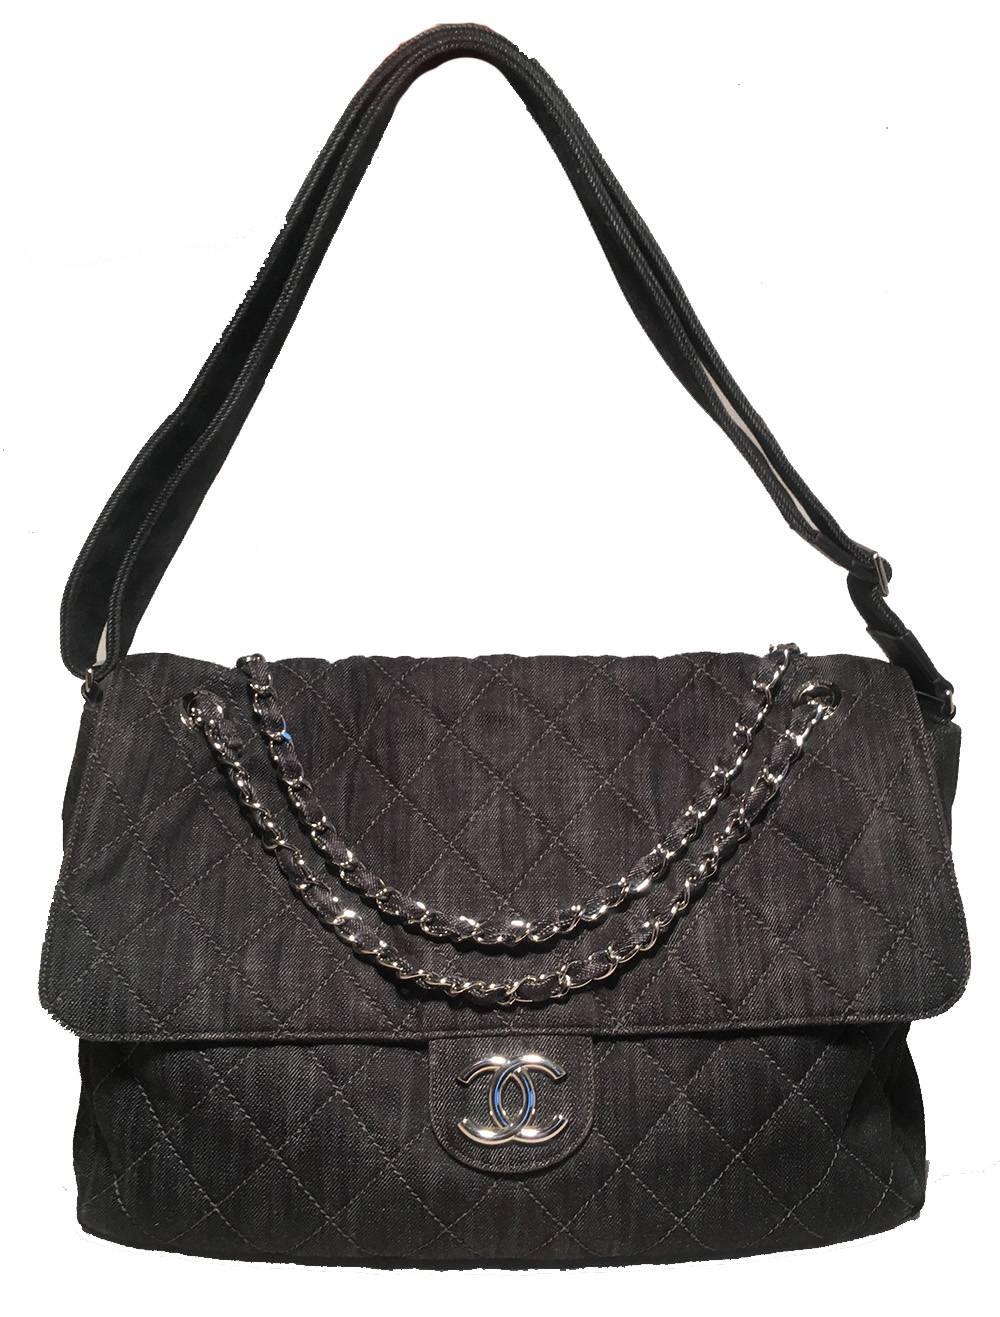 Chanel Denim Quilted XL Classic Messenger Flap Shoulder Bag Tote in excellent condition.  Dark denim quilted exterior trimmed with shining silver hardware.  Single flap snap closure opens to a light grey nylon lined interior that holds 2 storage